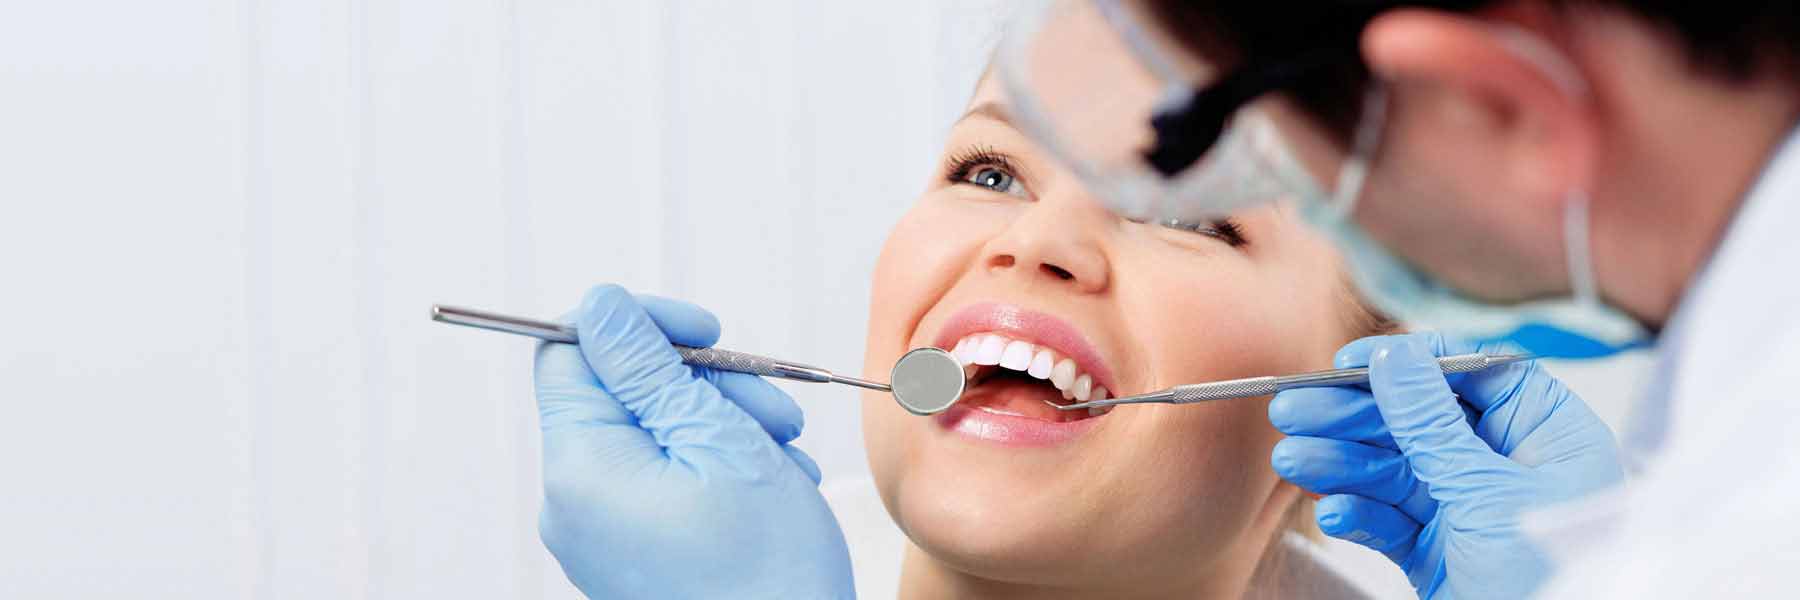 Dental Service in  East Maitland - Tooth N Care